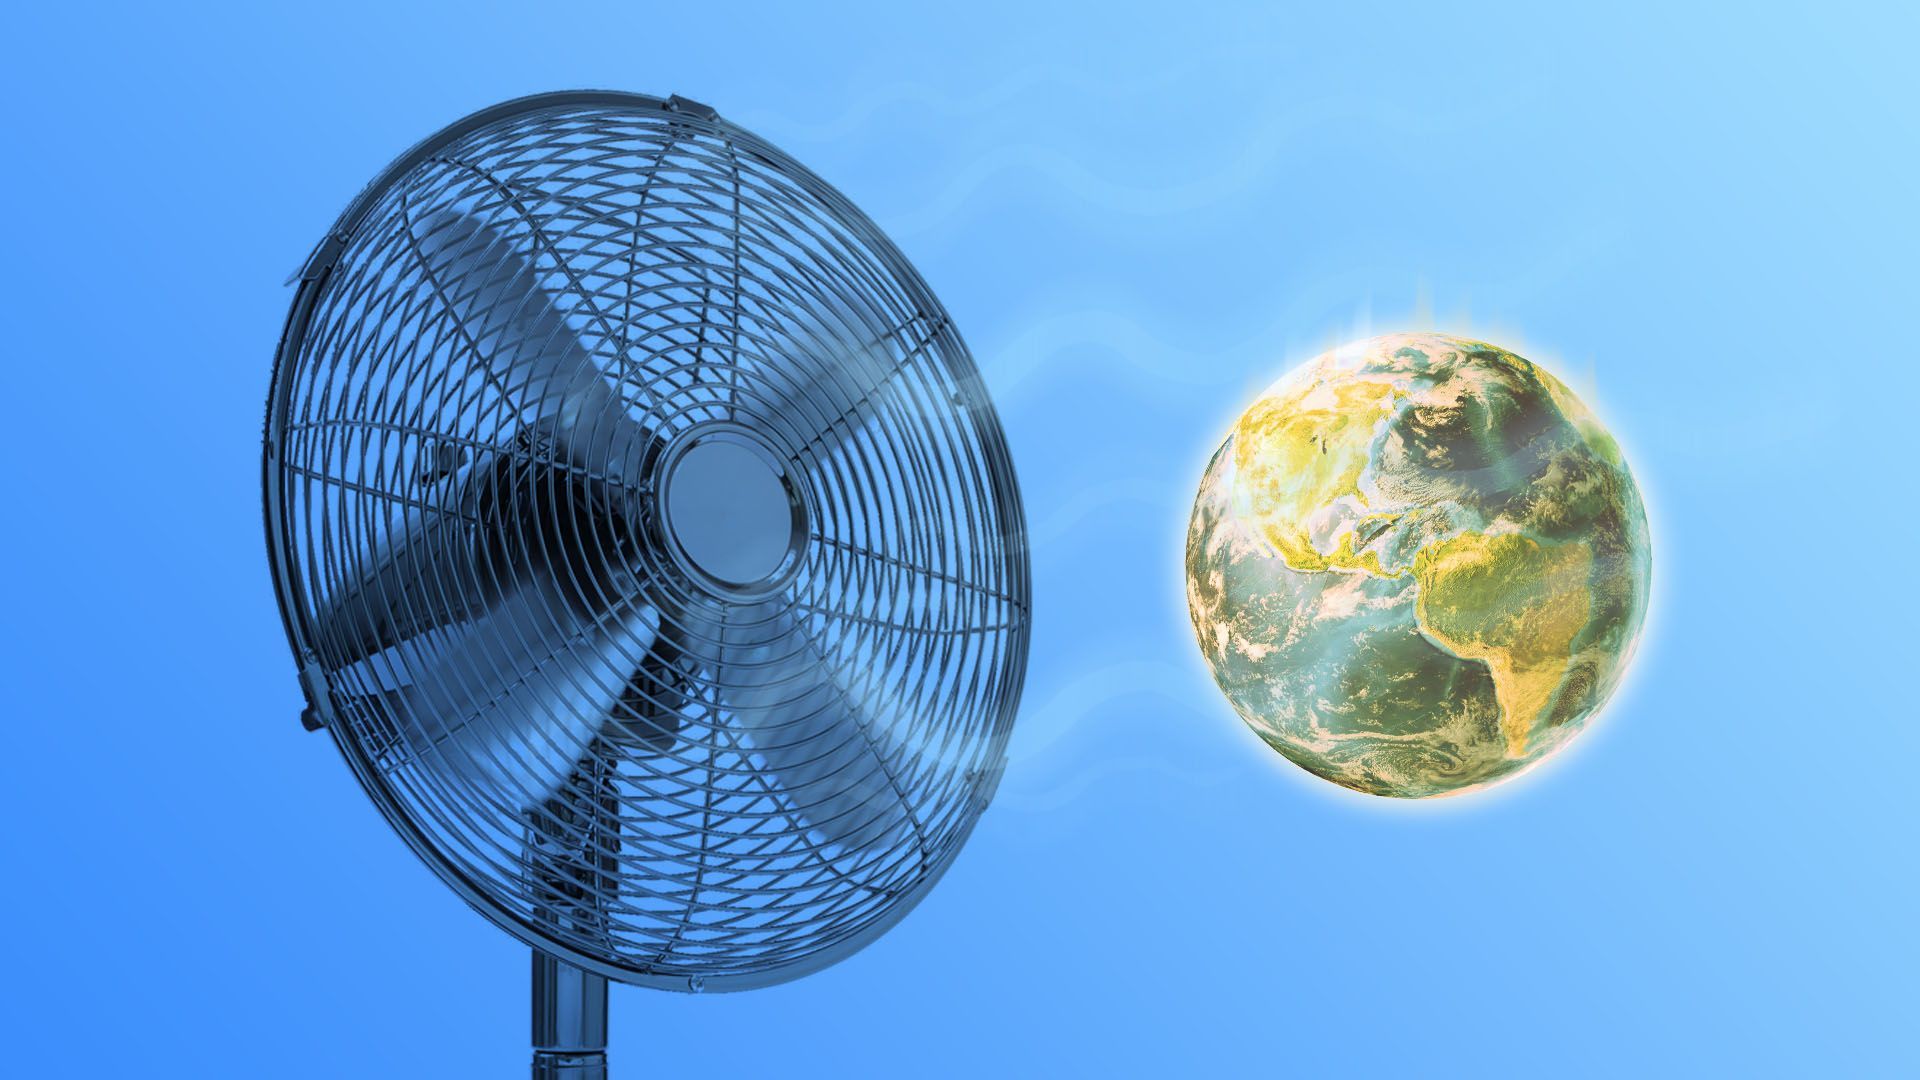 Illustration of a fan blowing on Earth to cool it down.